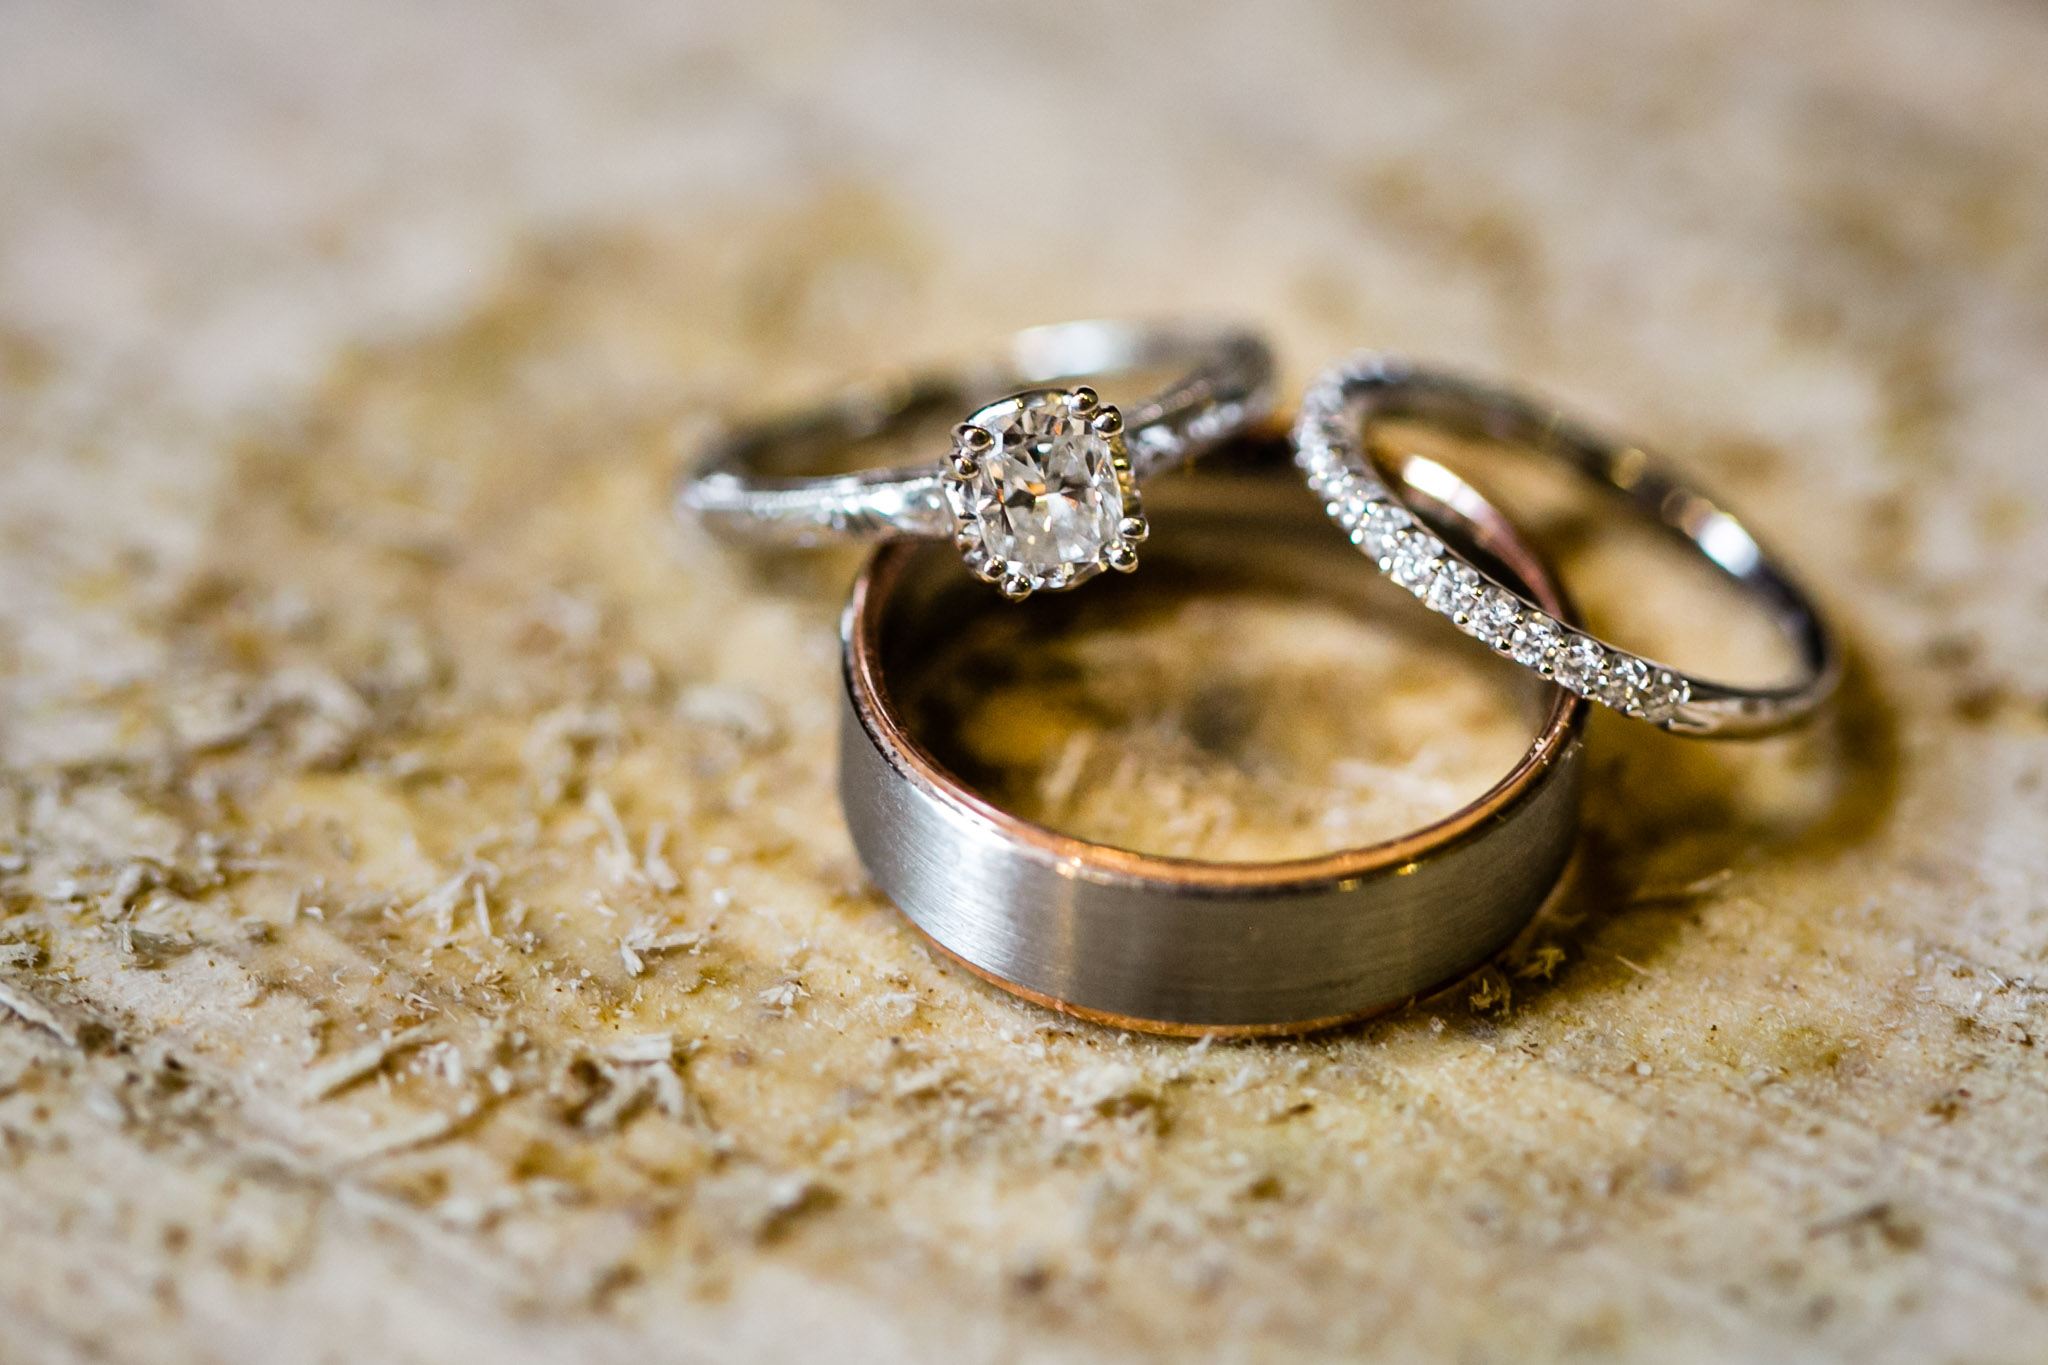 Wedding bands sitting on piece of wood | Durham Wedding Photographer | By G. Lin Photography